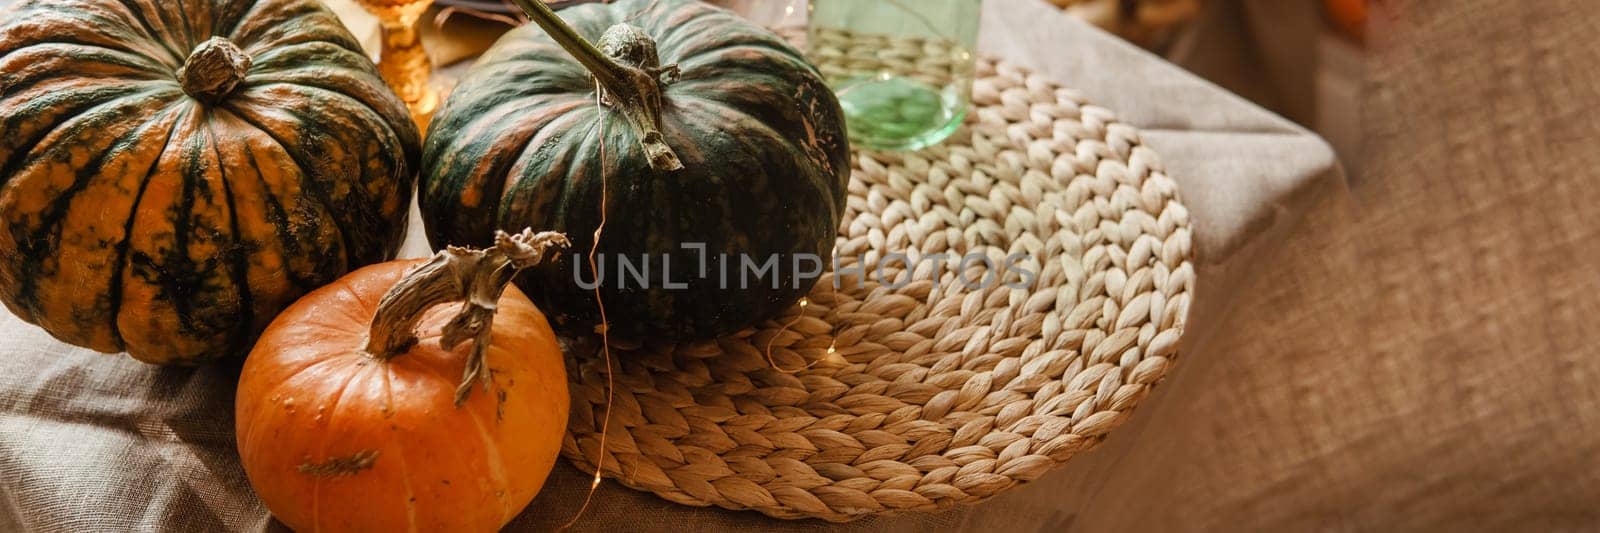 Autumn interior: a table covered with dishes, pumpkins, a relaxed composition of Japanese pampas grass. Interior in the photo Studio. Close - up of a decorated autumn table